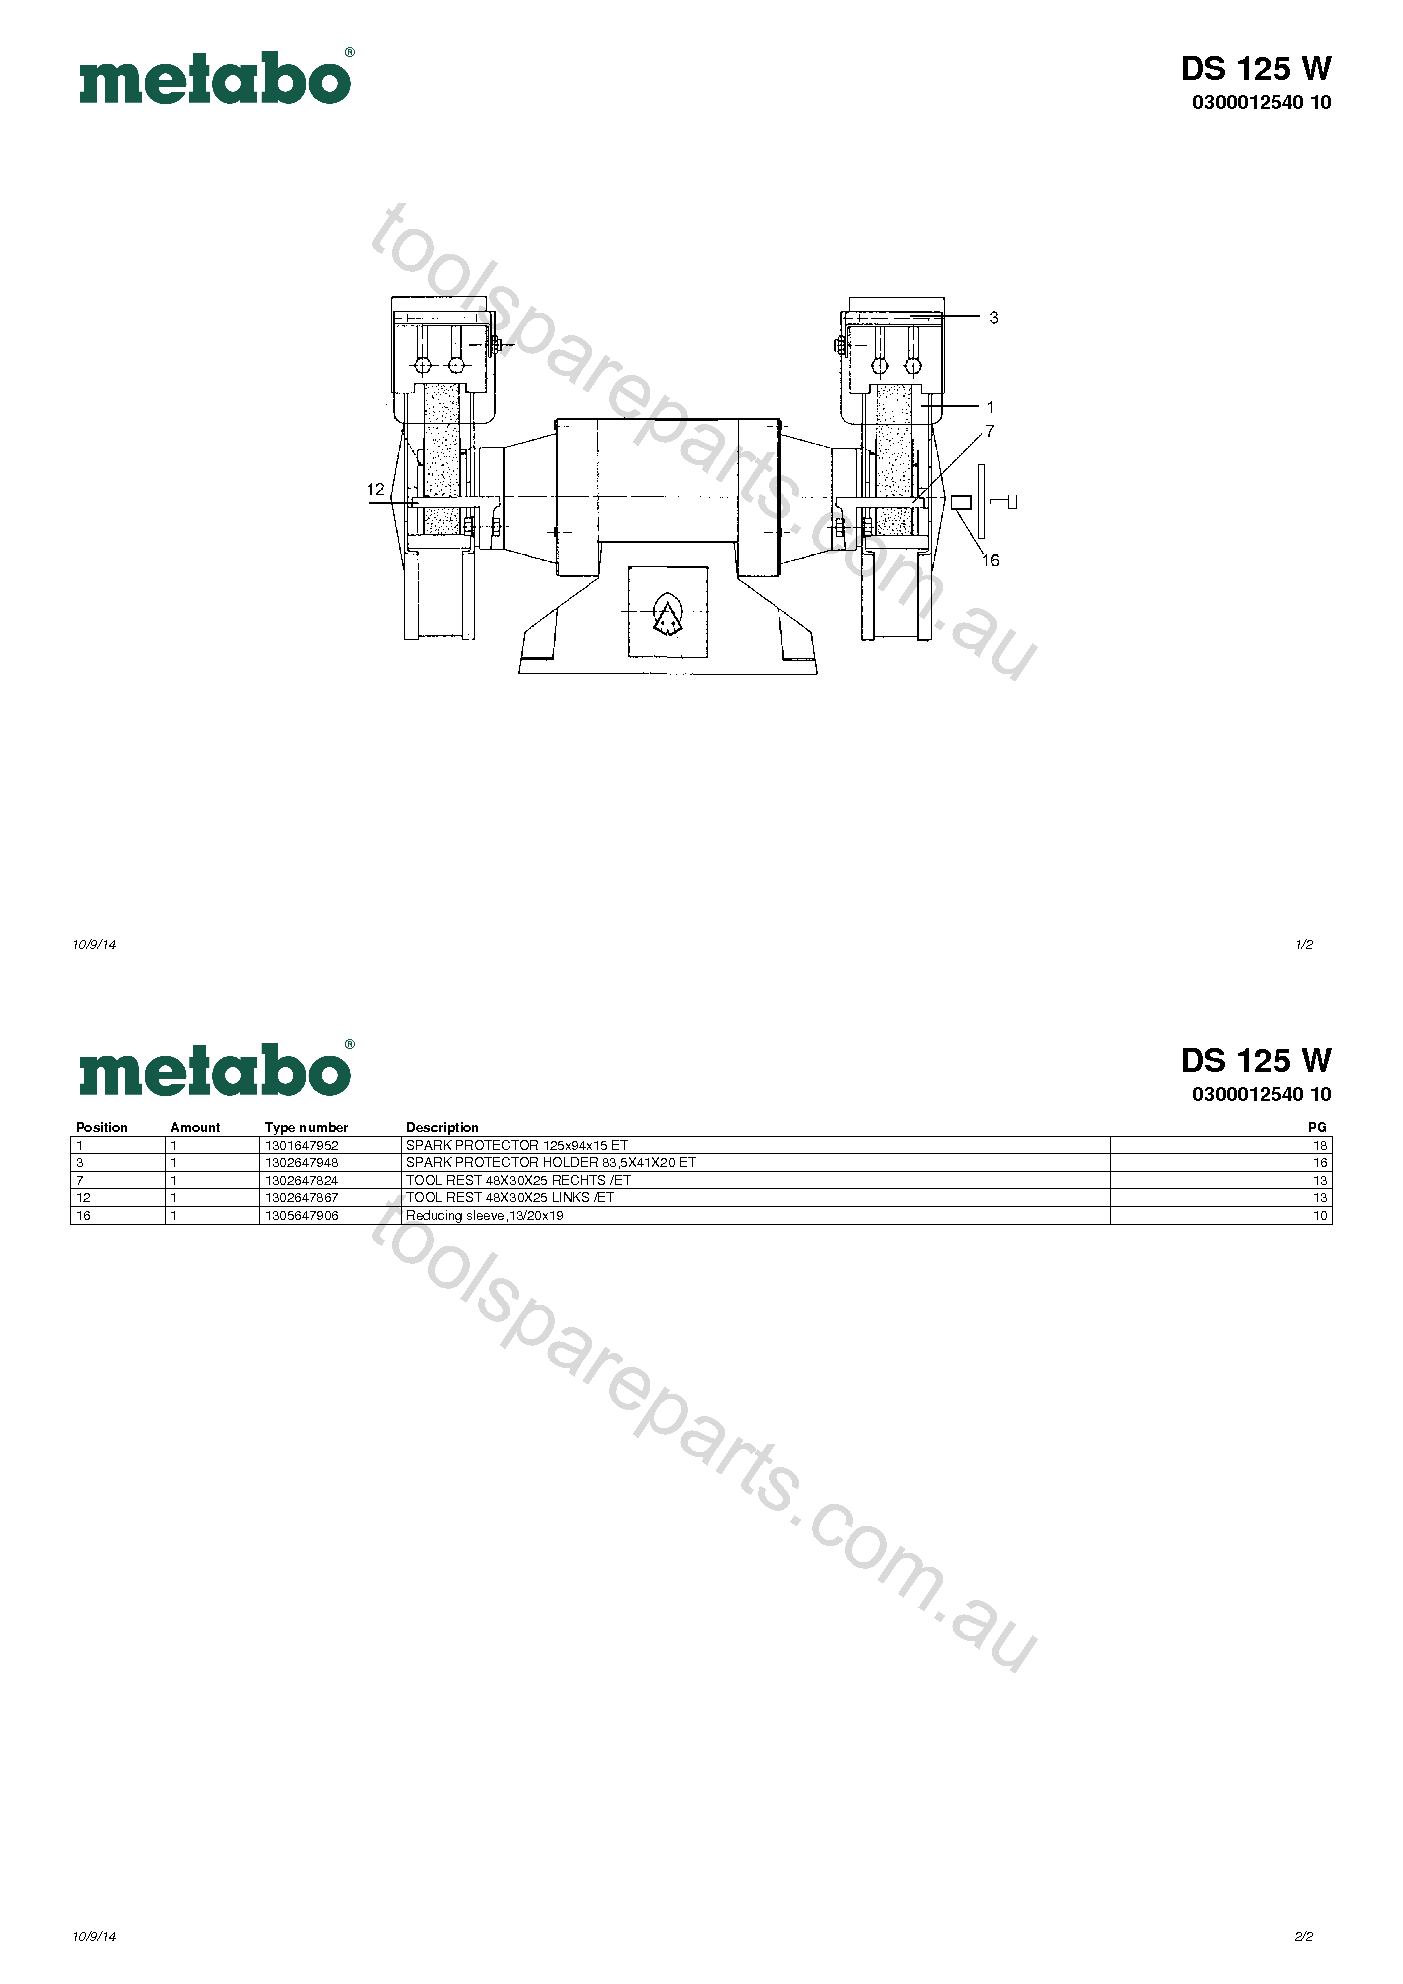 Metabo DS 125 W 0300012540 10  Diagram 1